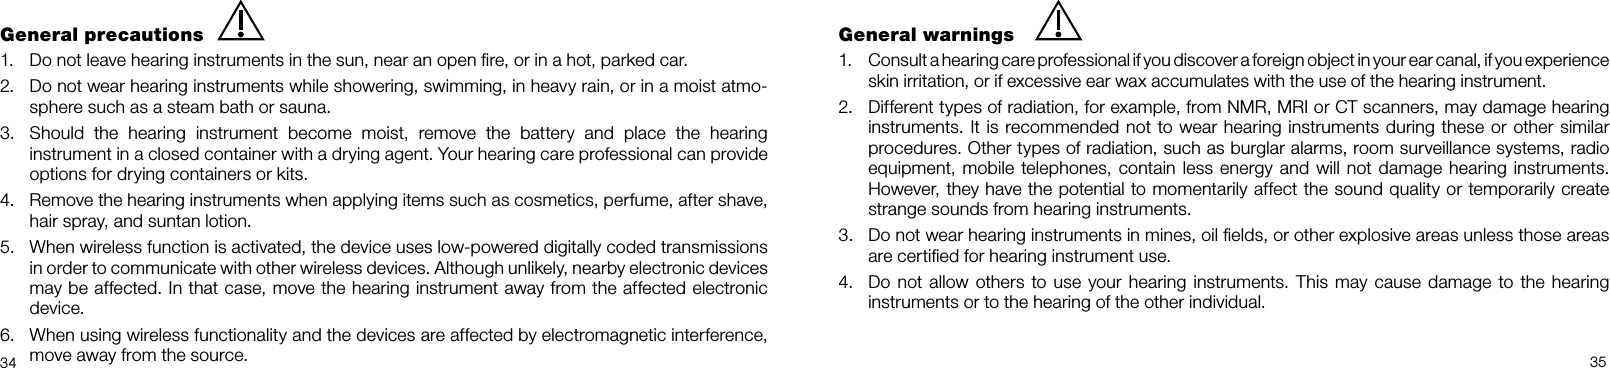   34 35General precautions1.  Do not leave hearing instruments in the sun, near an open ﬁre, or in a hot, parked car.2.  Do not wear hearing instruments while showering, swimming, in heavy rain, or in a moist atmo-sphere such as a steam bath or sauna.3.  Should  the  hearing  instrument  become  moist,  remove  the  battery  and  place  the  hearing instrument in a closed container with a drying agent. Your hearing care professional can provide options for drying containers or kits.4.  Remove the hearing instruments when applying items such as cosmetics, perfume, after shave, hair spray, and suntan lotion. 5.  When wireless function is activated, the device uses low-powered digitally coded transmissions in order to communicate with other wireless devices. Although unlikely, nearby electronic devices may be affected. In that case, move the hearing instrument away from the affected electronic device.6.  When using wireless functionality and the devices are affected by electromagnetic interference, move away from the source.General warnings1.  Consult a hearing care professional if you discover a foreign object in your ear canal, if you experience skin irritation, or if excessive ear wax accumulates with the use of the hearing instrument. 2.  Different types of radiation, for example, from NMR, MRI or CT scanners, may damage hearing instruments. It is recommended not to wear hearing instruments during these or other similar procedures. Other types of radiation, such as burglar alarms, room surveillance systems, radio equipment, mobile telephones, contain less  energy and will not damage hearing instruments. However, they have the potential to momentarily affect the sound quality or temporarily create strange sounds from hearing instruments.3.  Do not wear hearing instruments in mines, oil ﬁelds, or other explosive areas unless those areas are certiﬁed for hearing instrument use.4.  Do not allow others to use your hearing instruments. This may cause damage  to the hearing  instruments or to the hearing of the other individual.